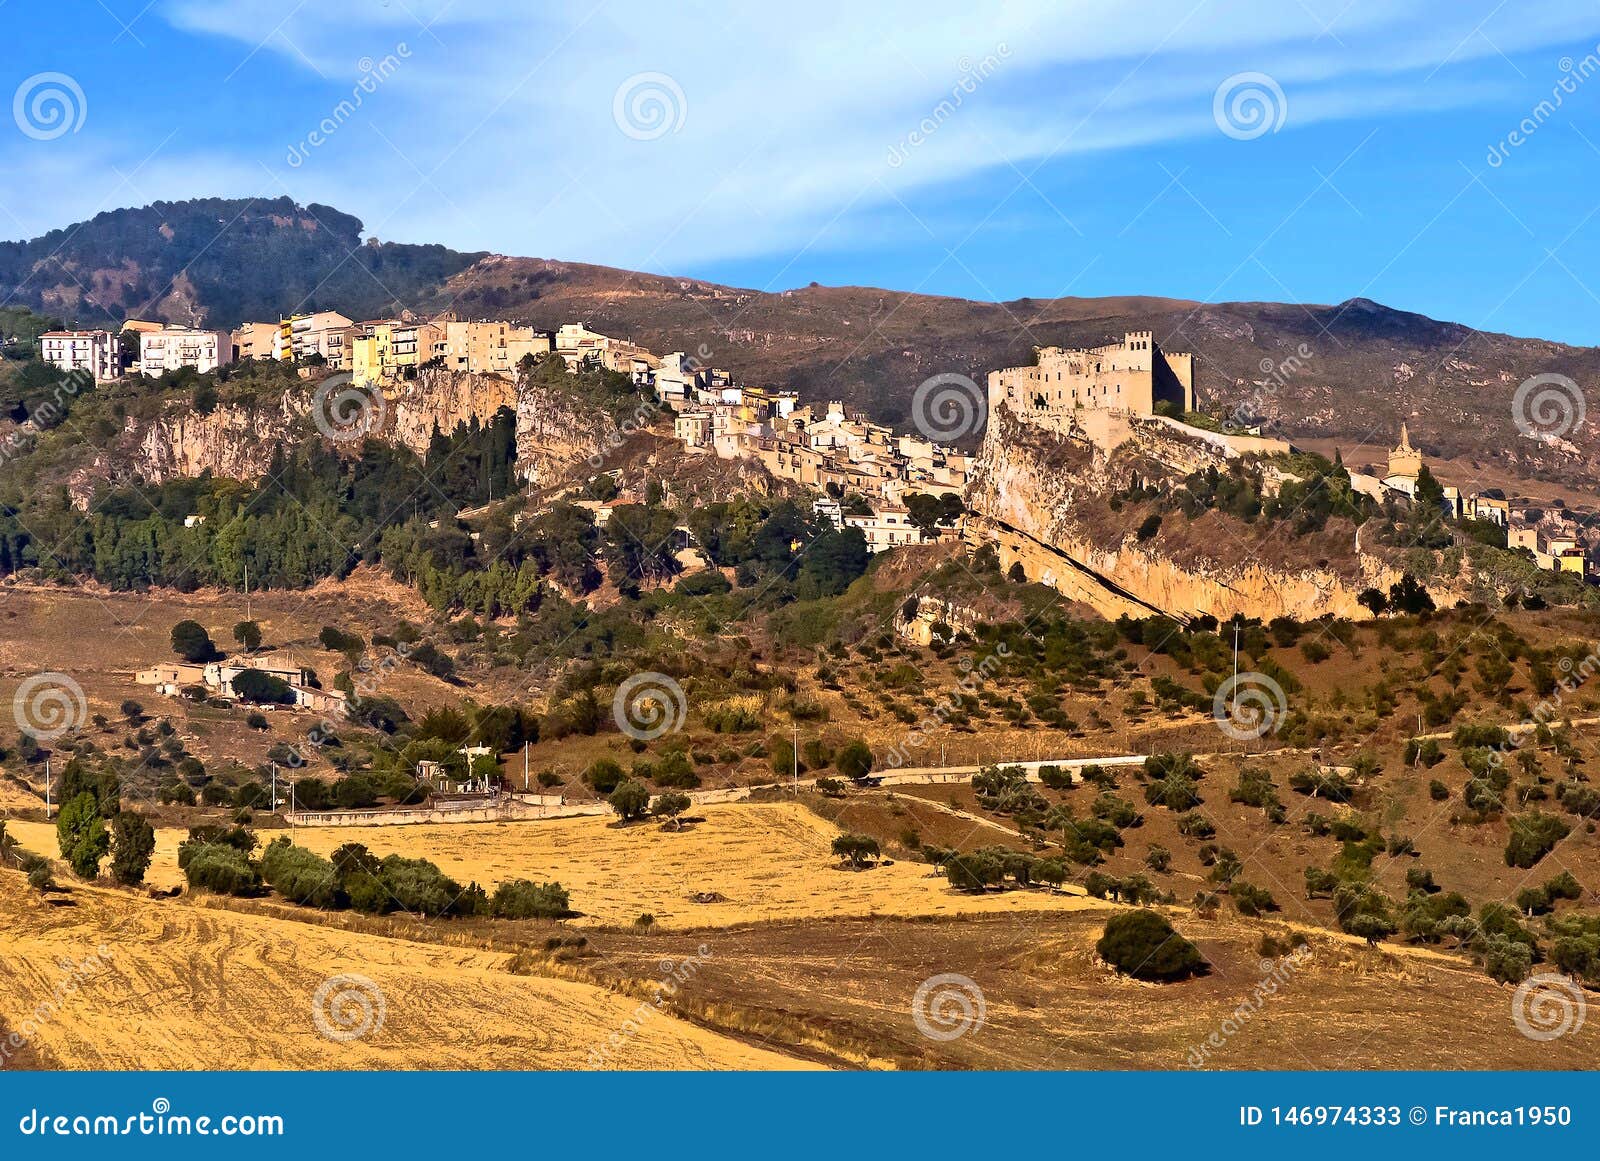 the castle of caccamo and the village